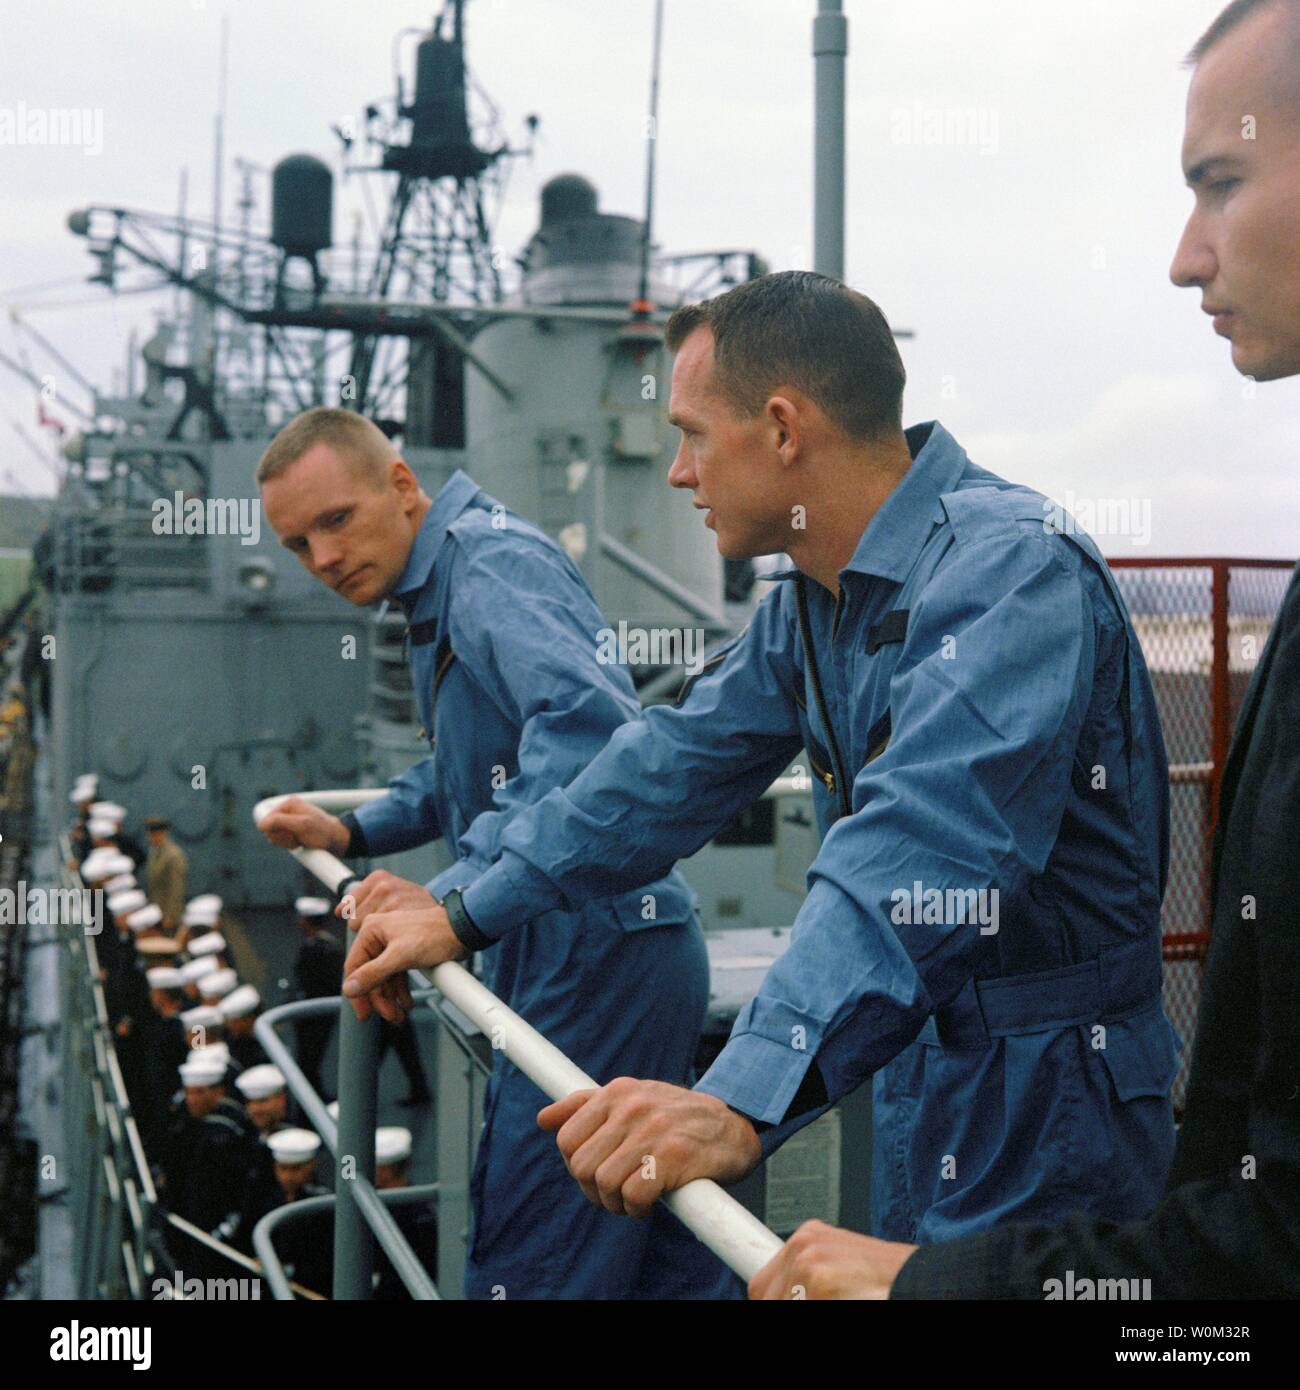 NASA astronauts Neil Armstrong (left), Gemini 8 command pilot, and David Scott (right), pilot, stand on the deck of the USS Leonard F. Mason upon its arrival at Naha, Okinawa, on March 17, 1966. March 16, 2016 marks the 50th anniversary of NASA's Gemini 8 mission, the sixth manned spaceflight conducted during the United States' Project Gemini program. The primary objective of the mission, the successful docking of two spacecraft in orbit, a first in spaceflight, was a success though the crew would experience a critical in-space system failure, forcing them to abandon the mission prematurely. U Stock Photo